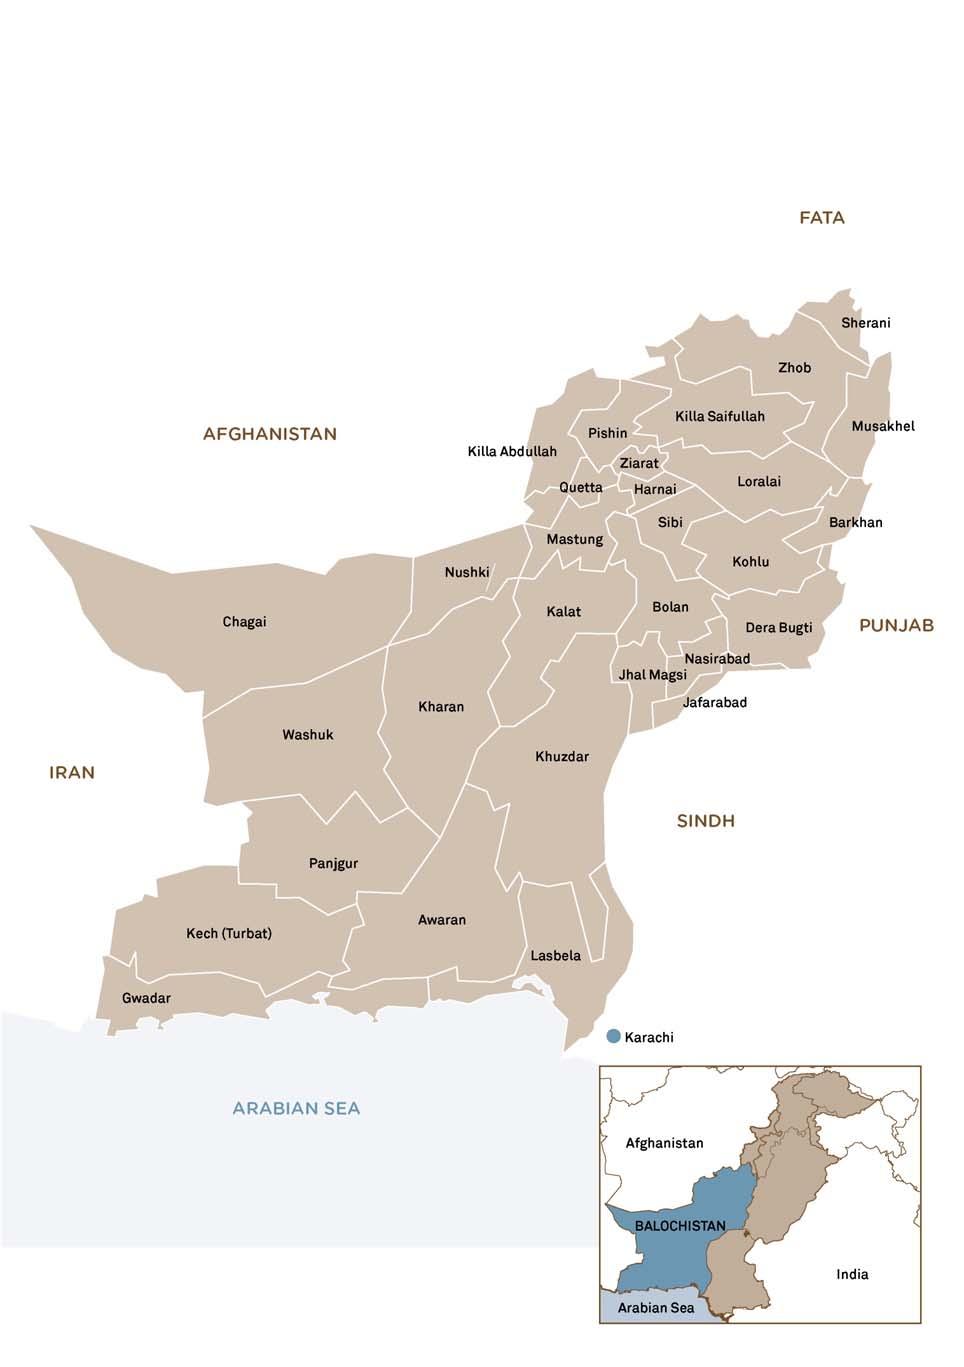 ANNEX 3: MAP OF BALOCHISTAN NB Two new districts are not presented on this map: